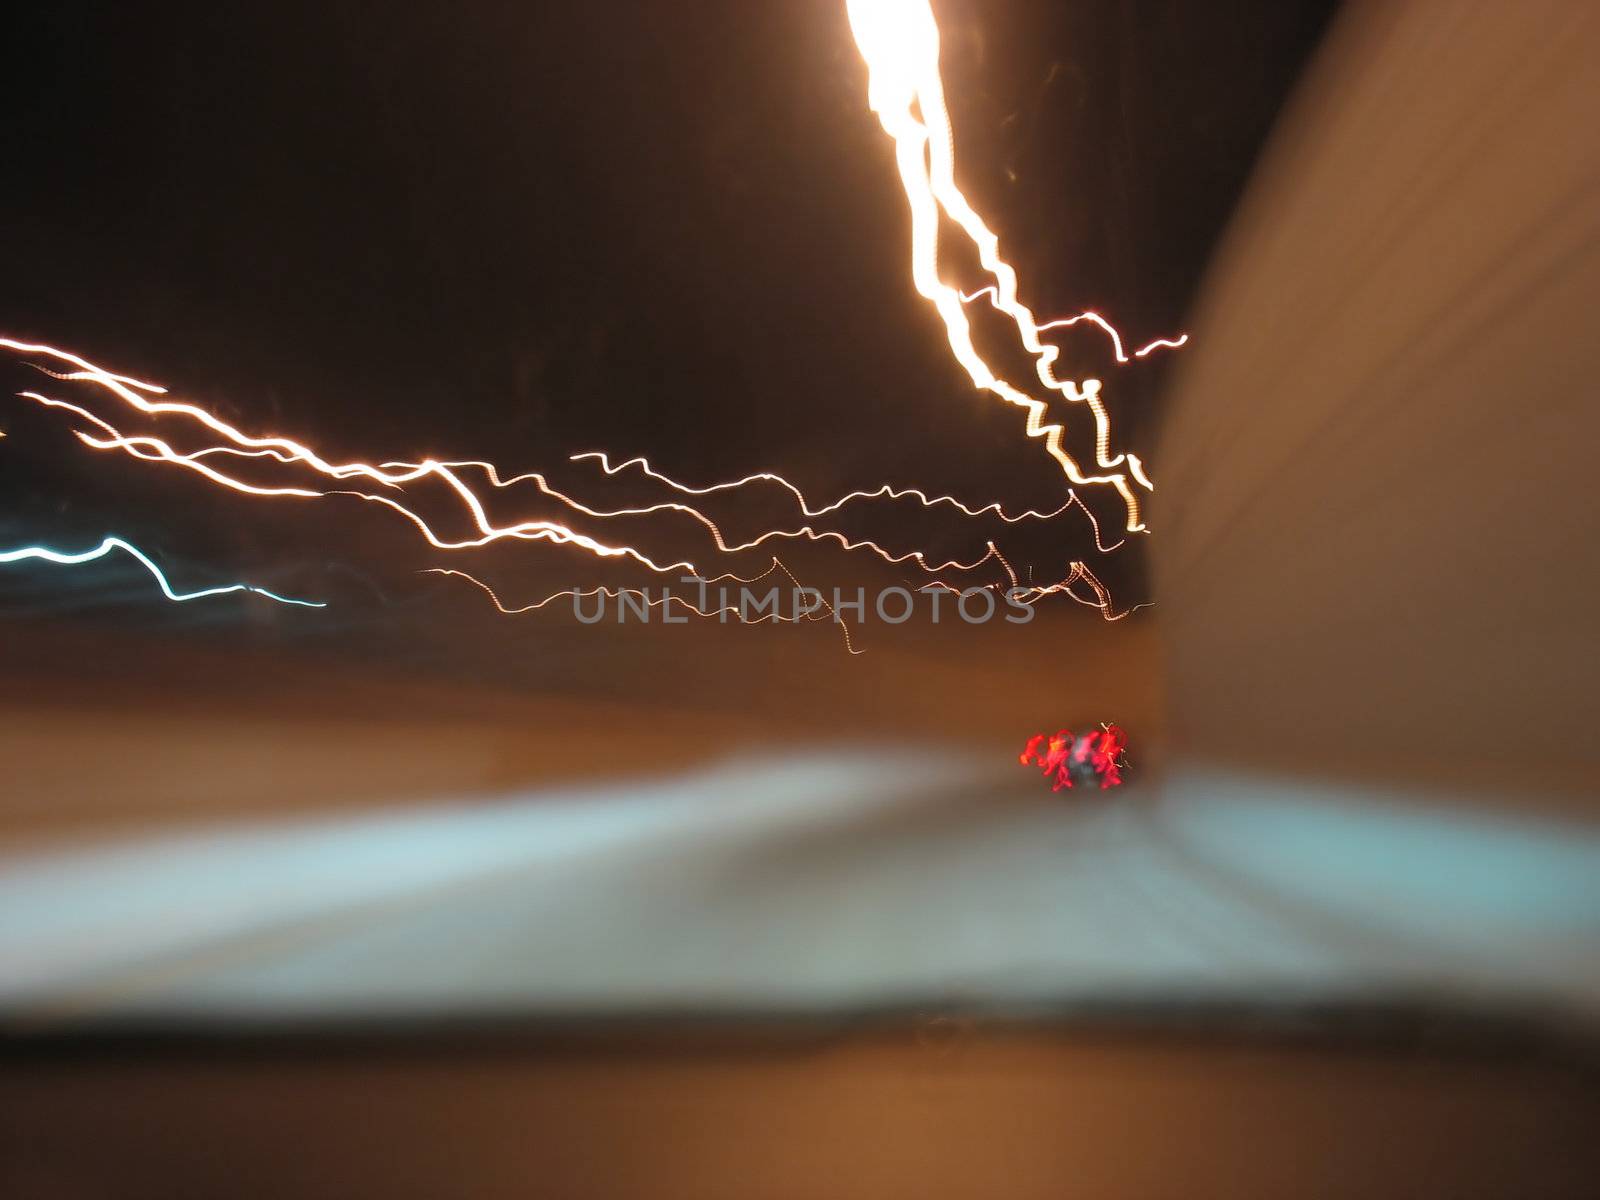 playing with light - a nightshot on the highway